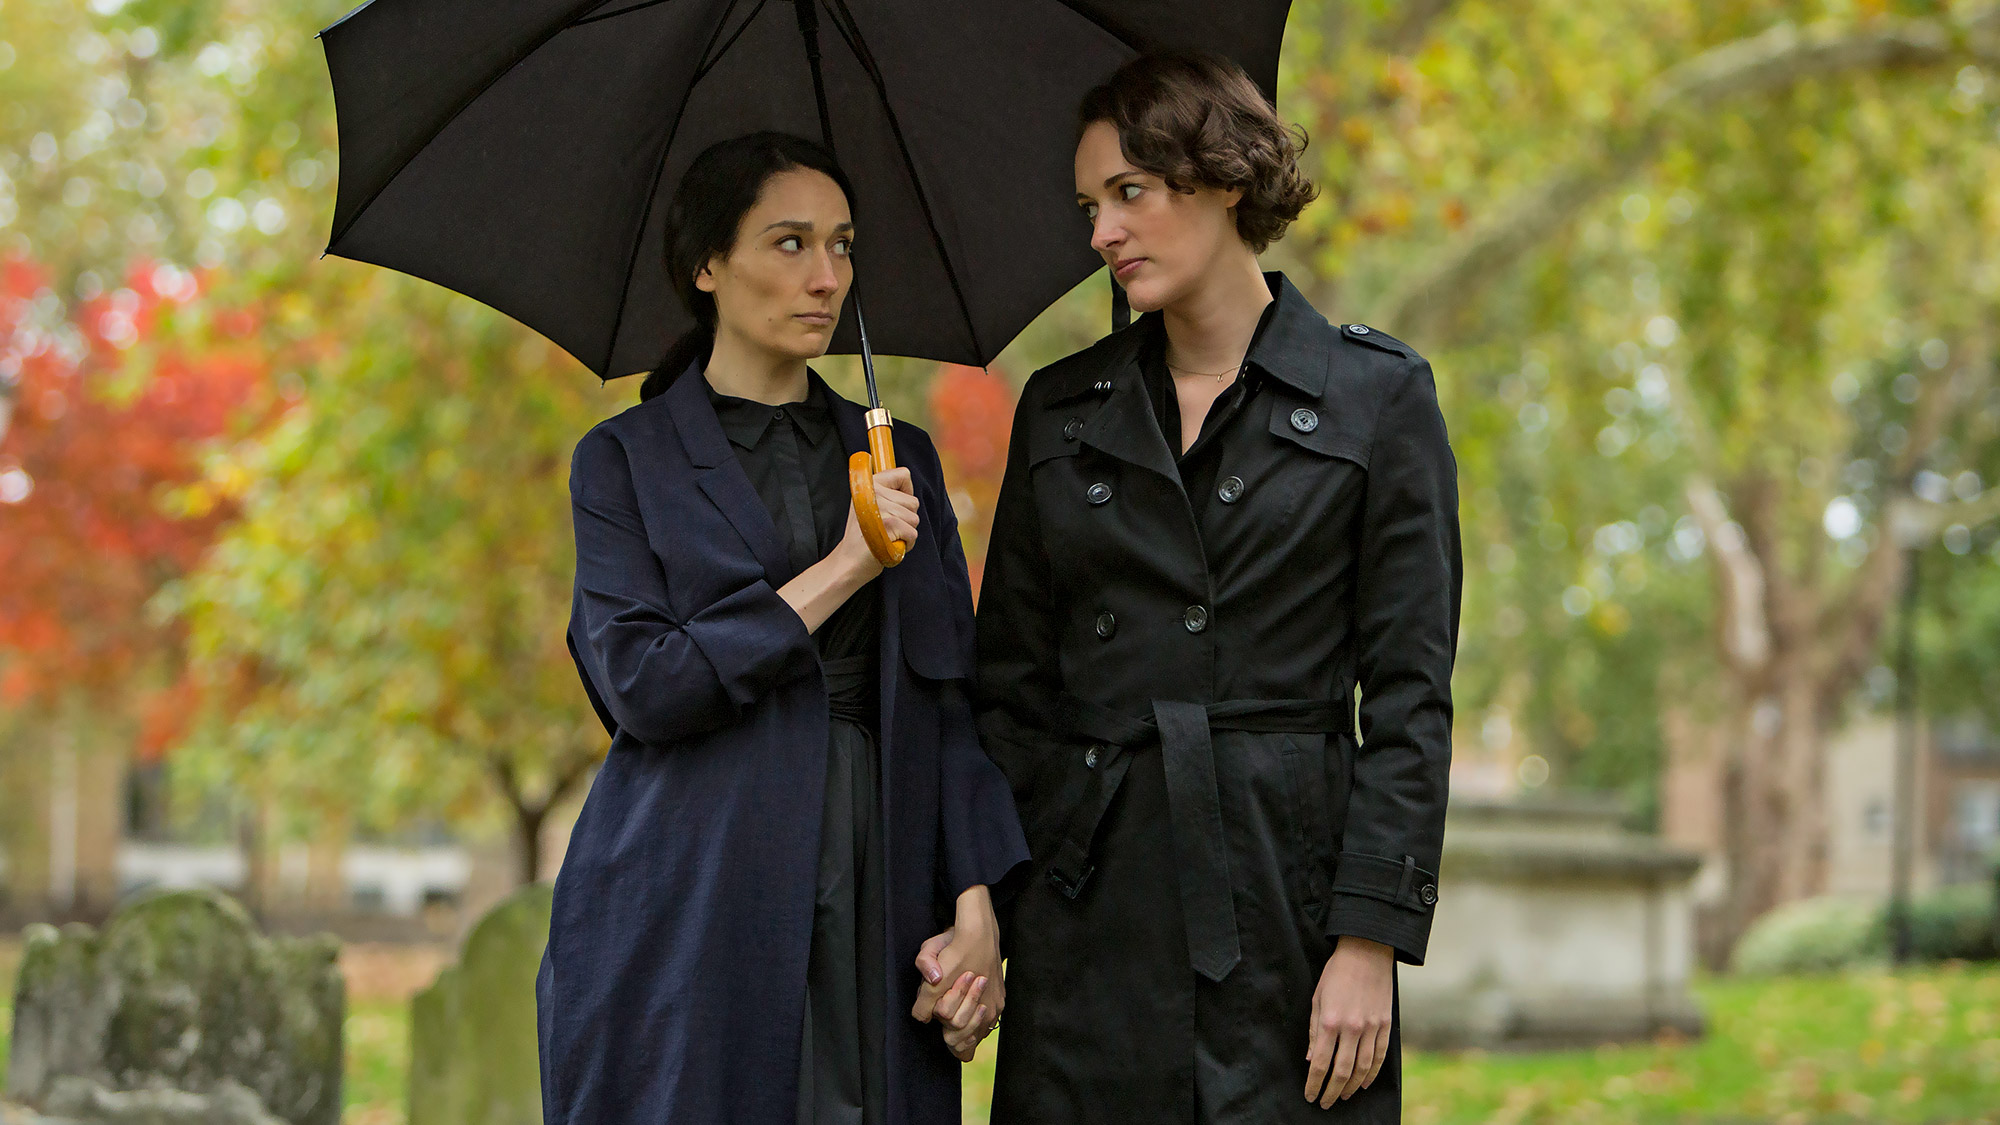 Sian Clifford (as Claire) holds an umbrella over her and Phoebe Waller-Bridge (as Fleabag) in Fleabag